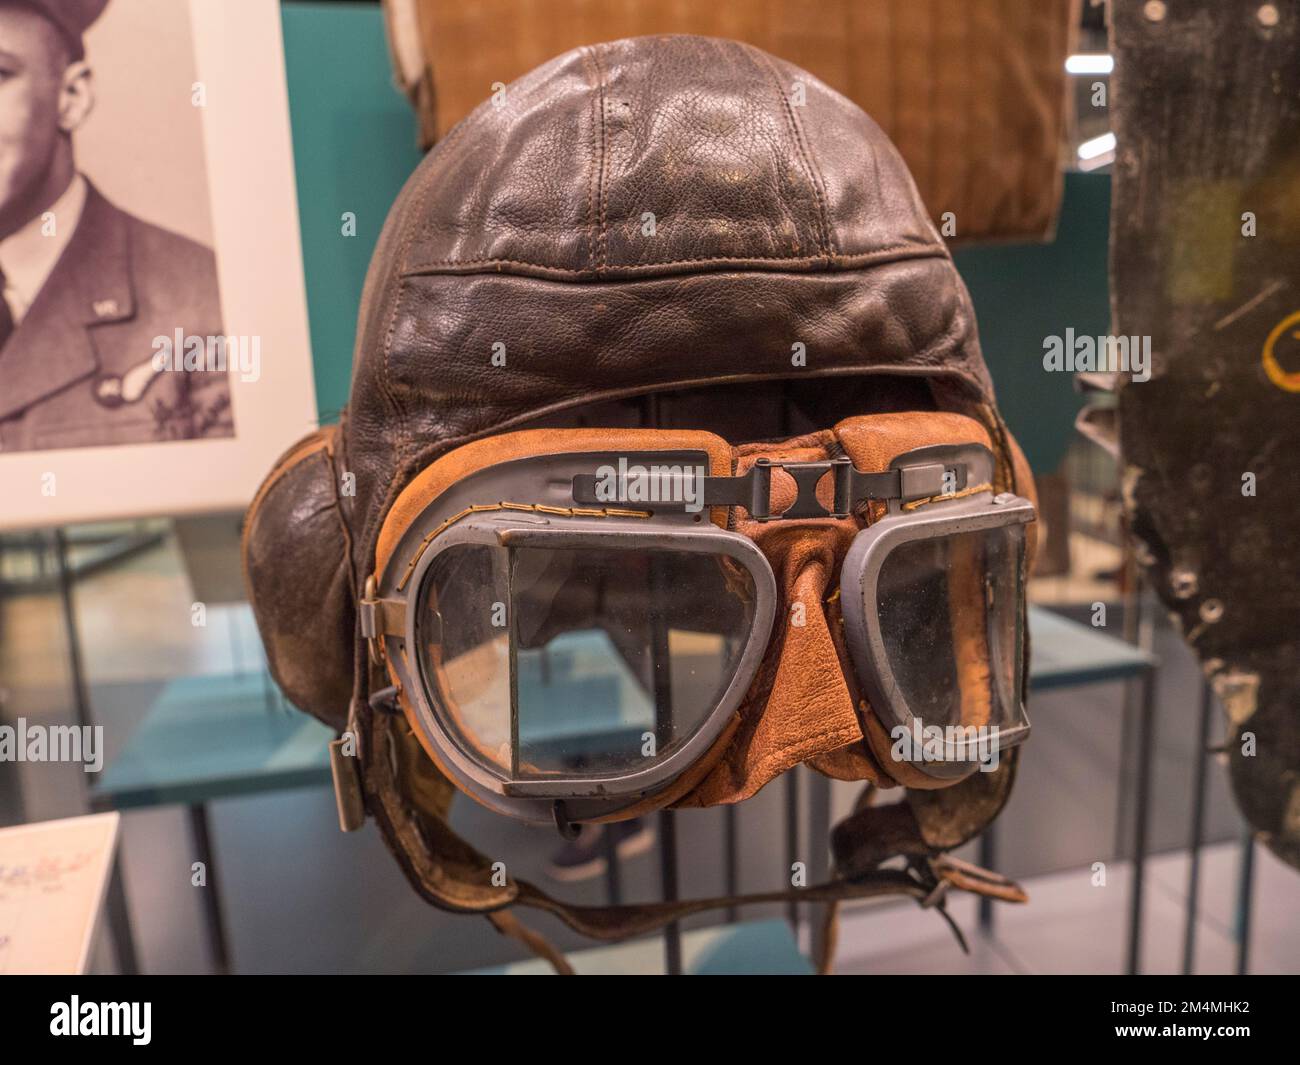 Flying goggles and helmet of an RAF gunner from WWII, Imperial War Museum, London, UK. Stock Photo